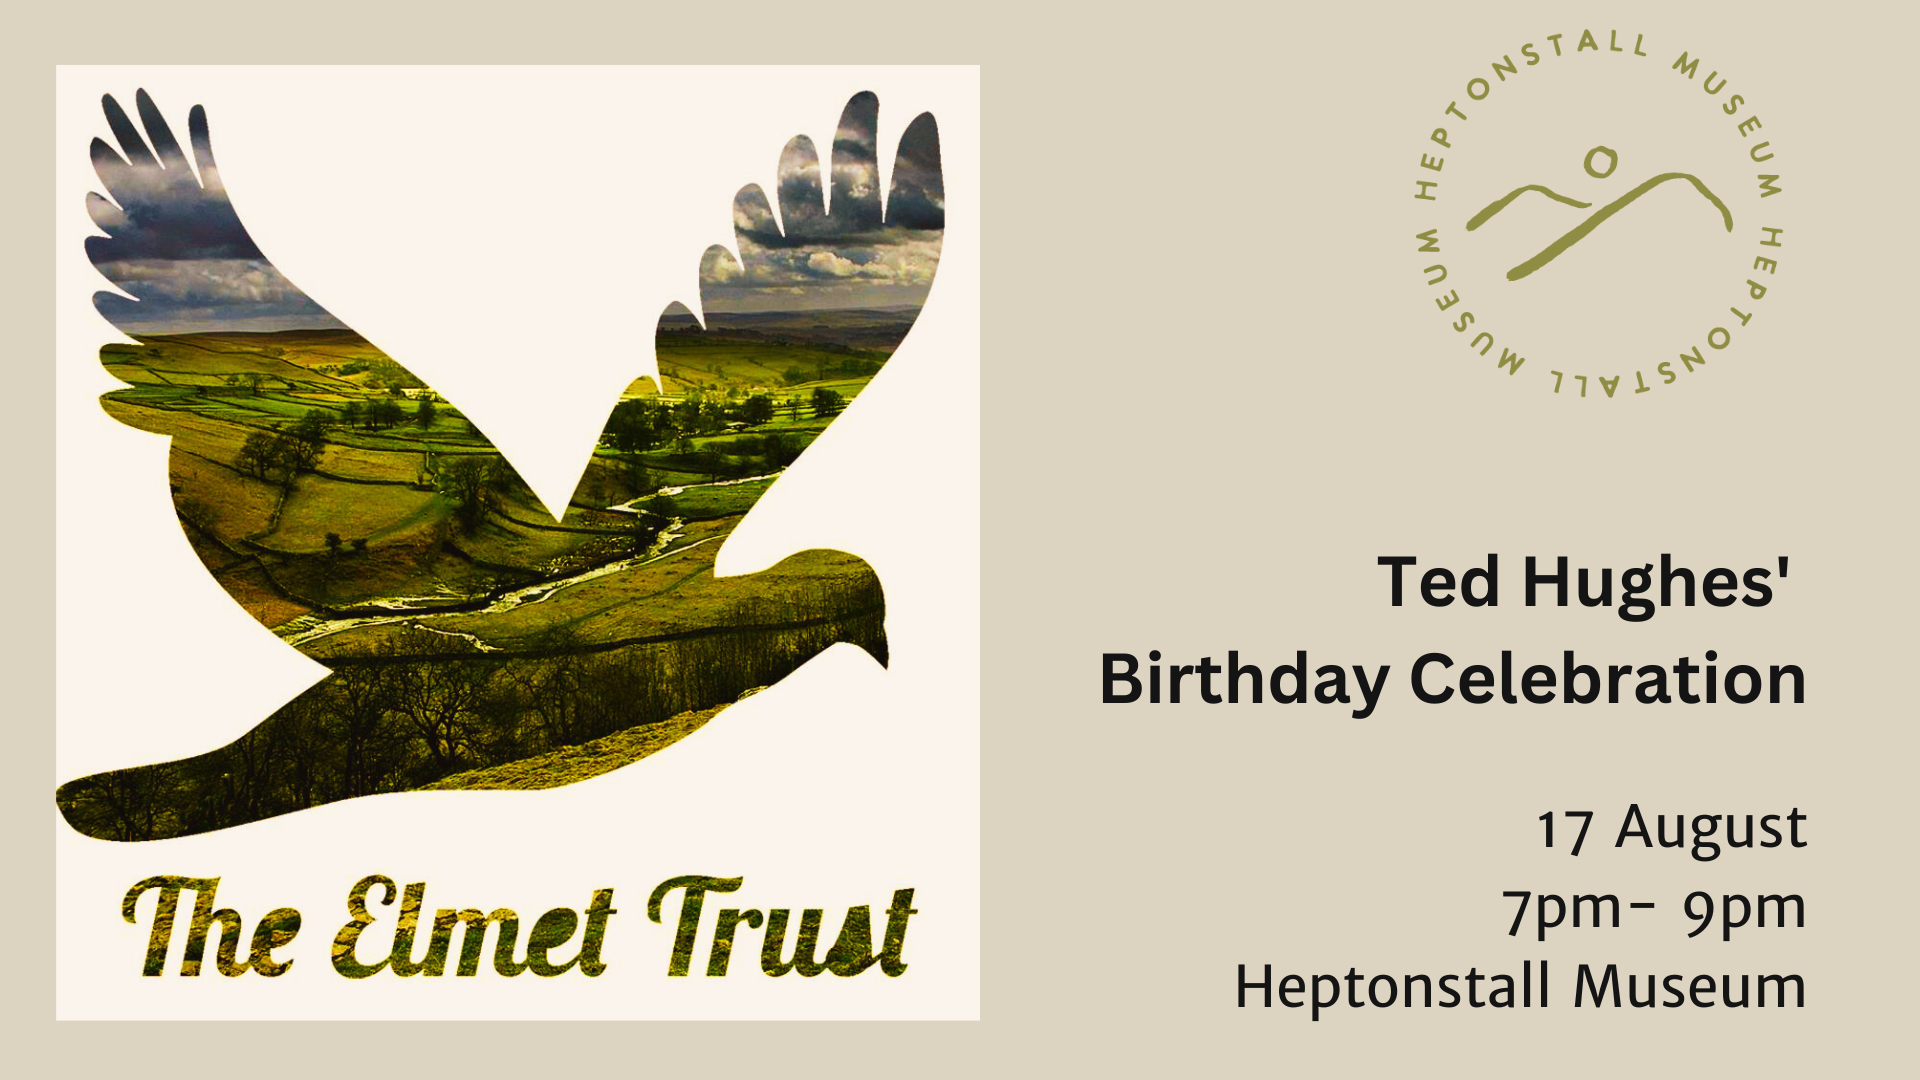 Advert Ted Hughes' Birthday Celebrations on 17 August with the Elmet Trust logo on a biscuit background alongside the Heptonstall Musem roundel logo with the Heptonstall Hills icon.